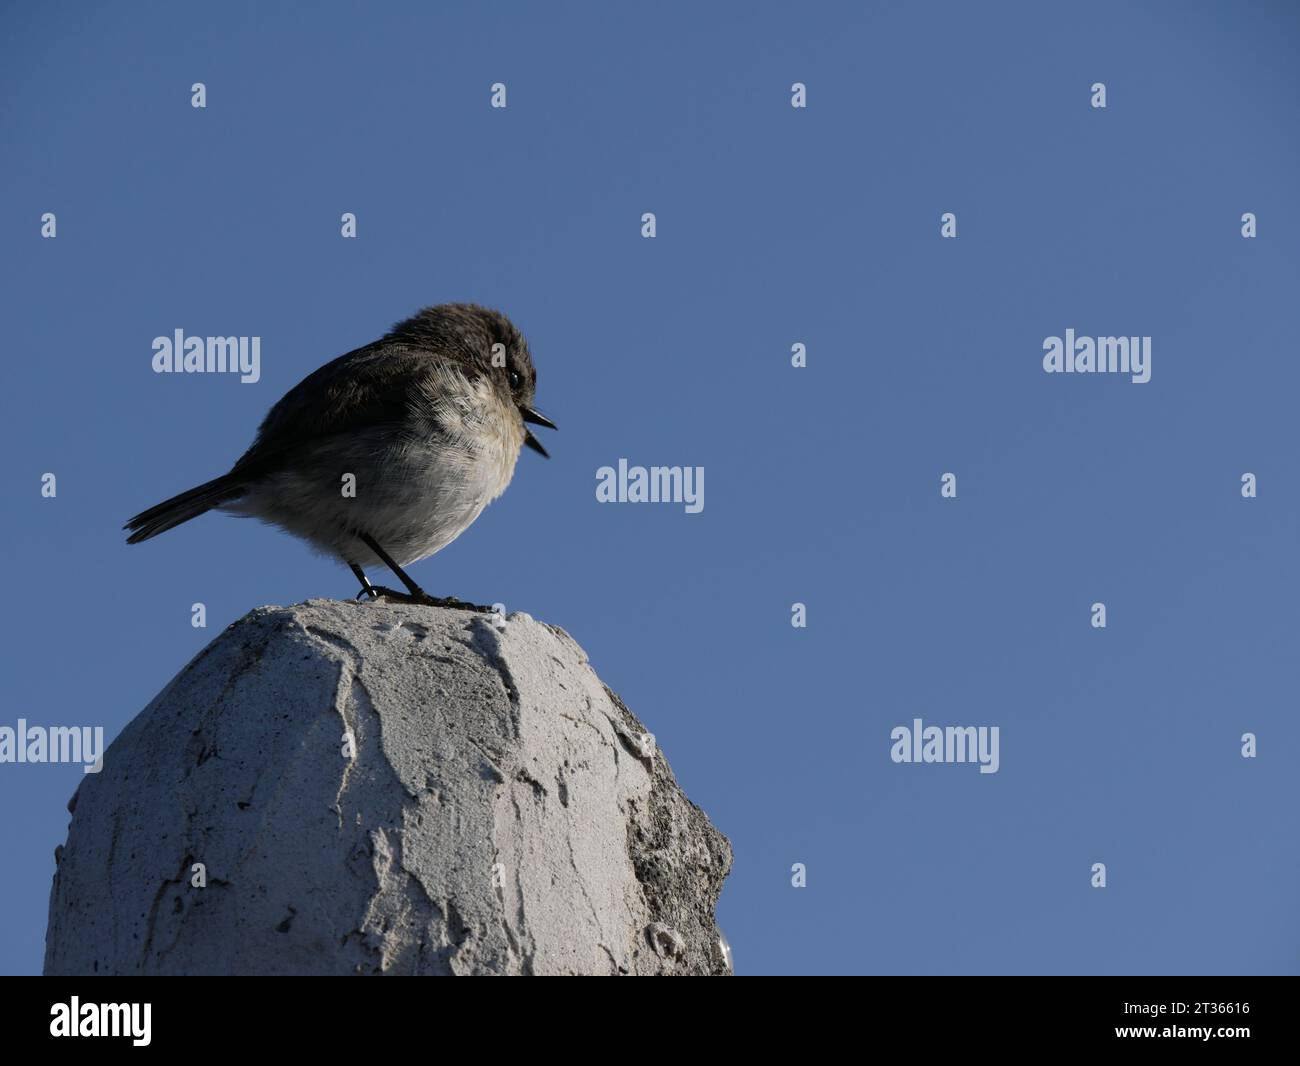 A tec tec bird or endemic reunion stonechat singing on top of a statue Stock Photo